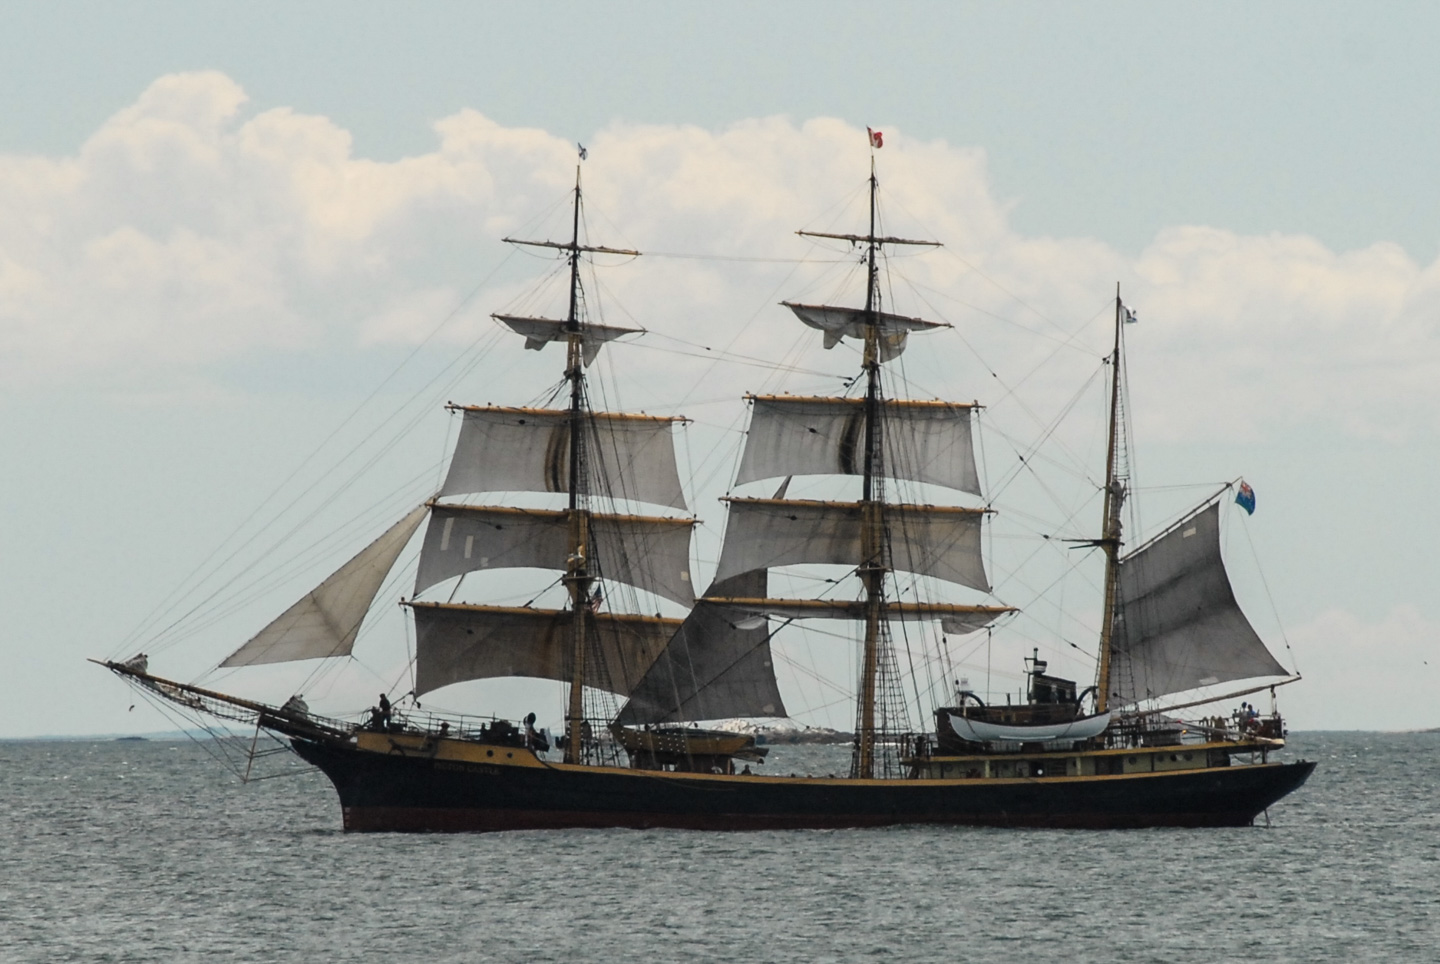 Tall ship with full sails